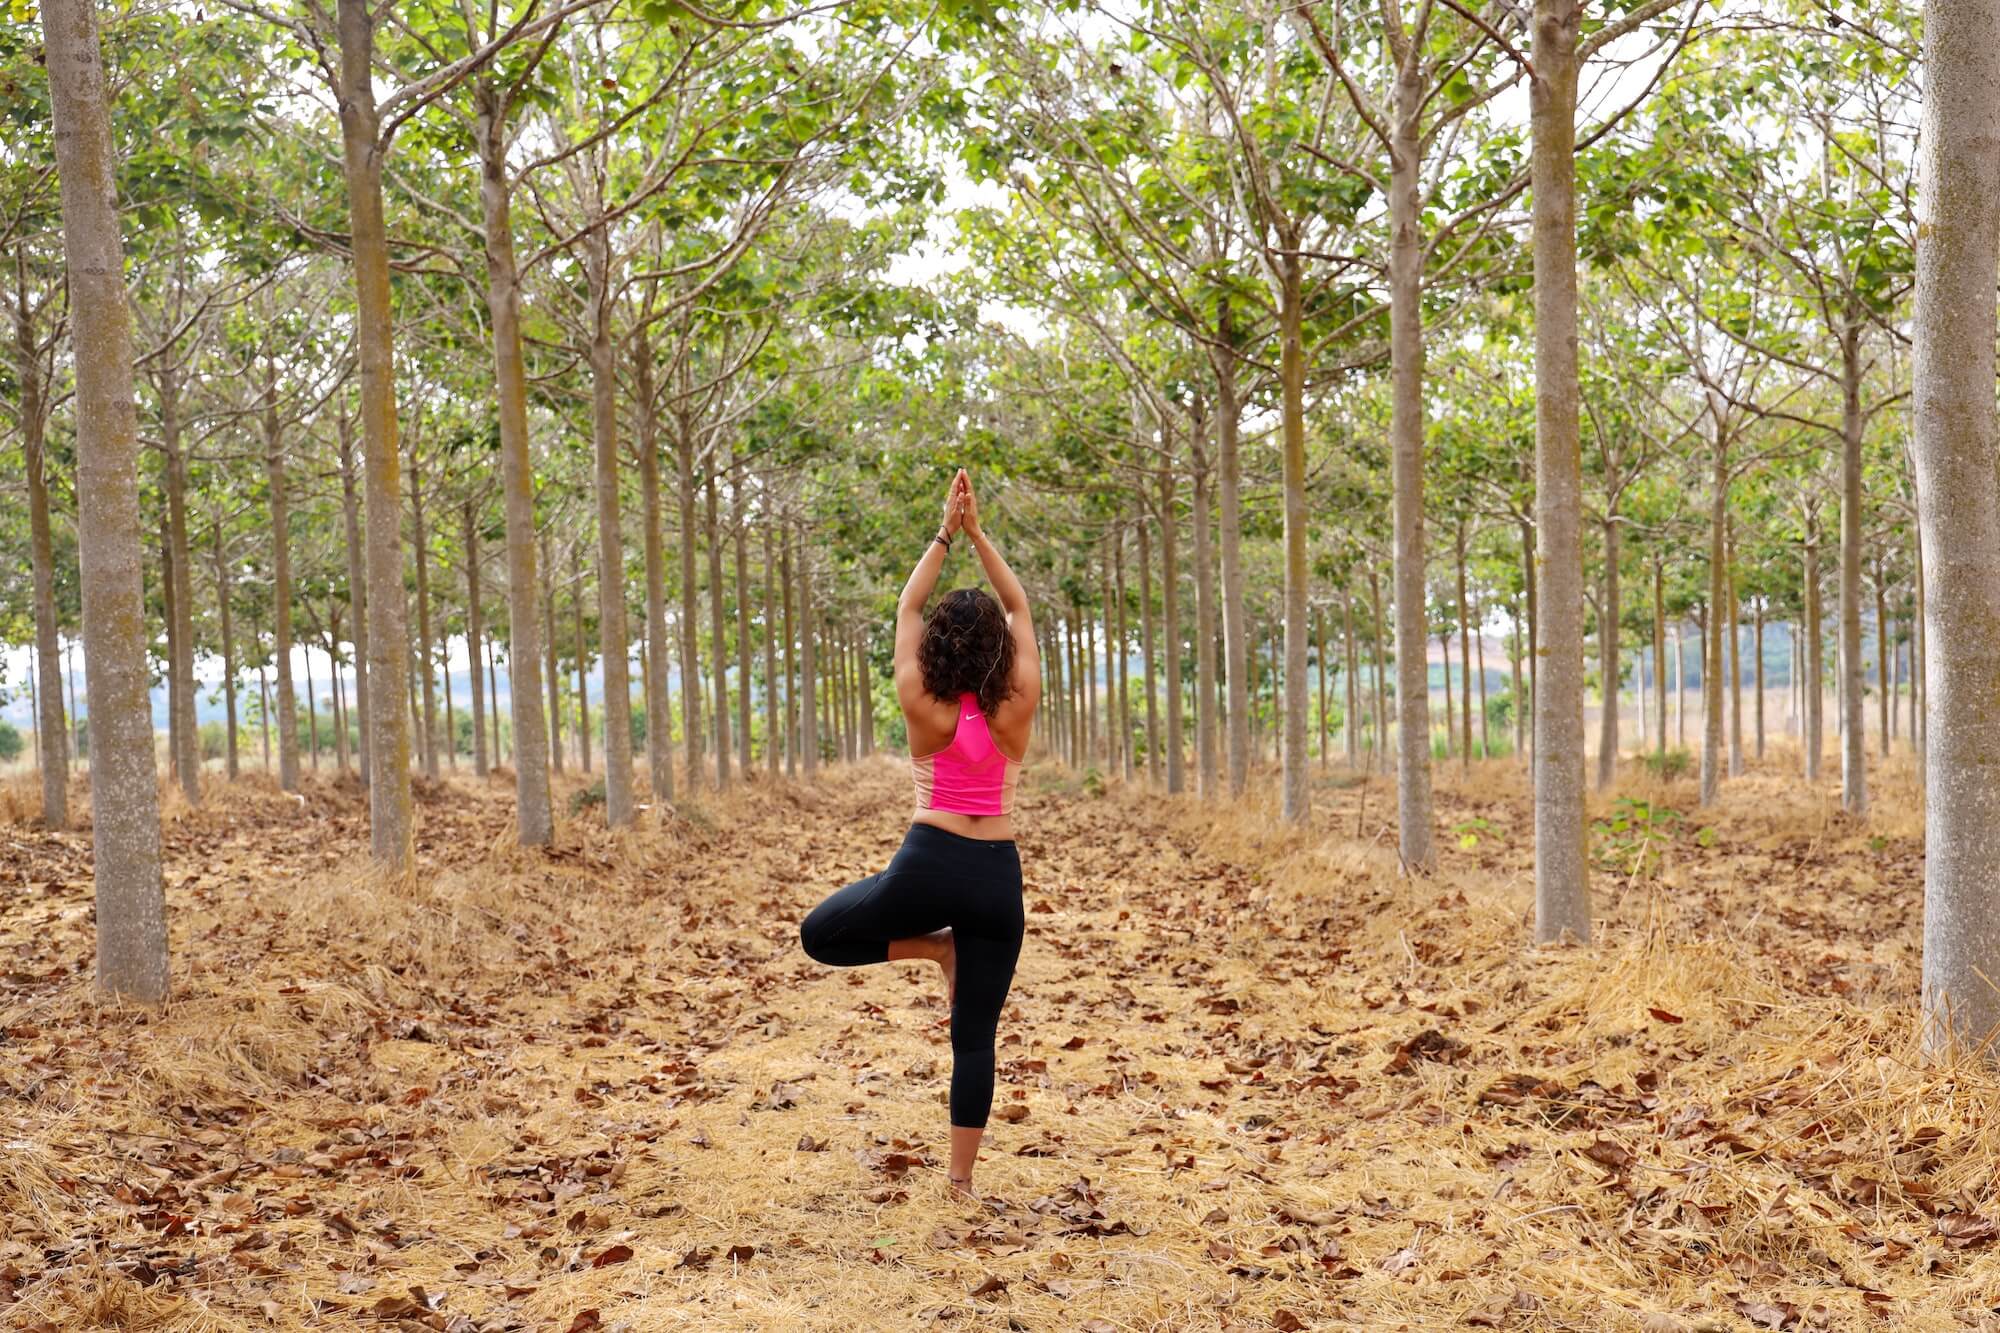 Yoga, mindfulness and self-compassion in nature